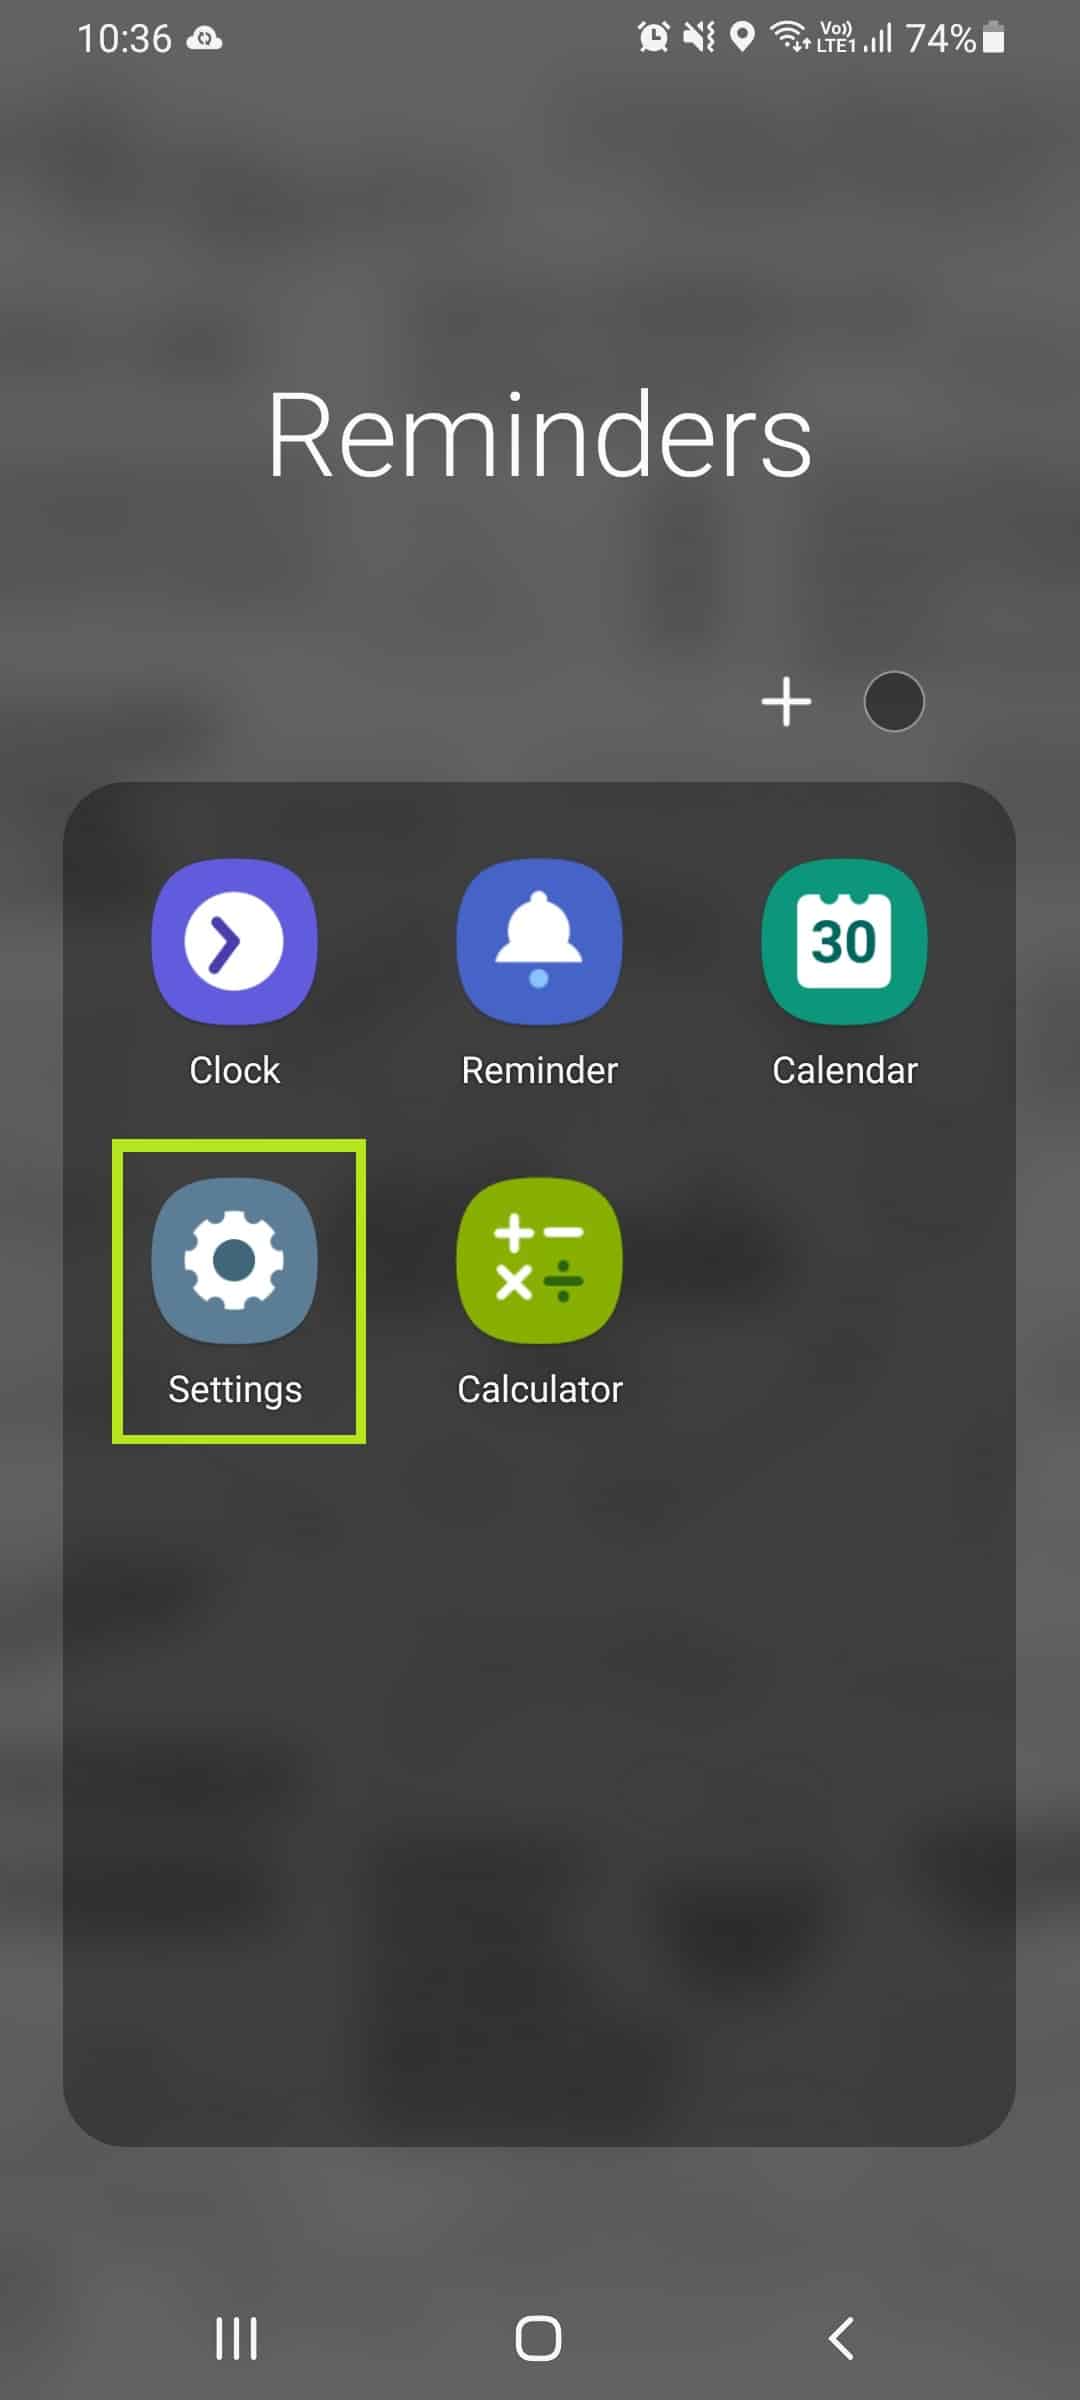 Open Settings on device
Select Apps